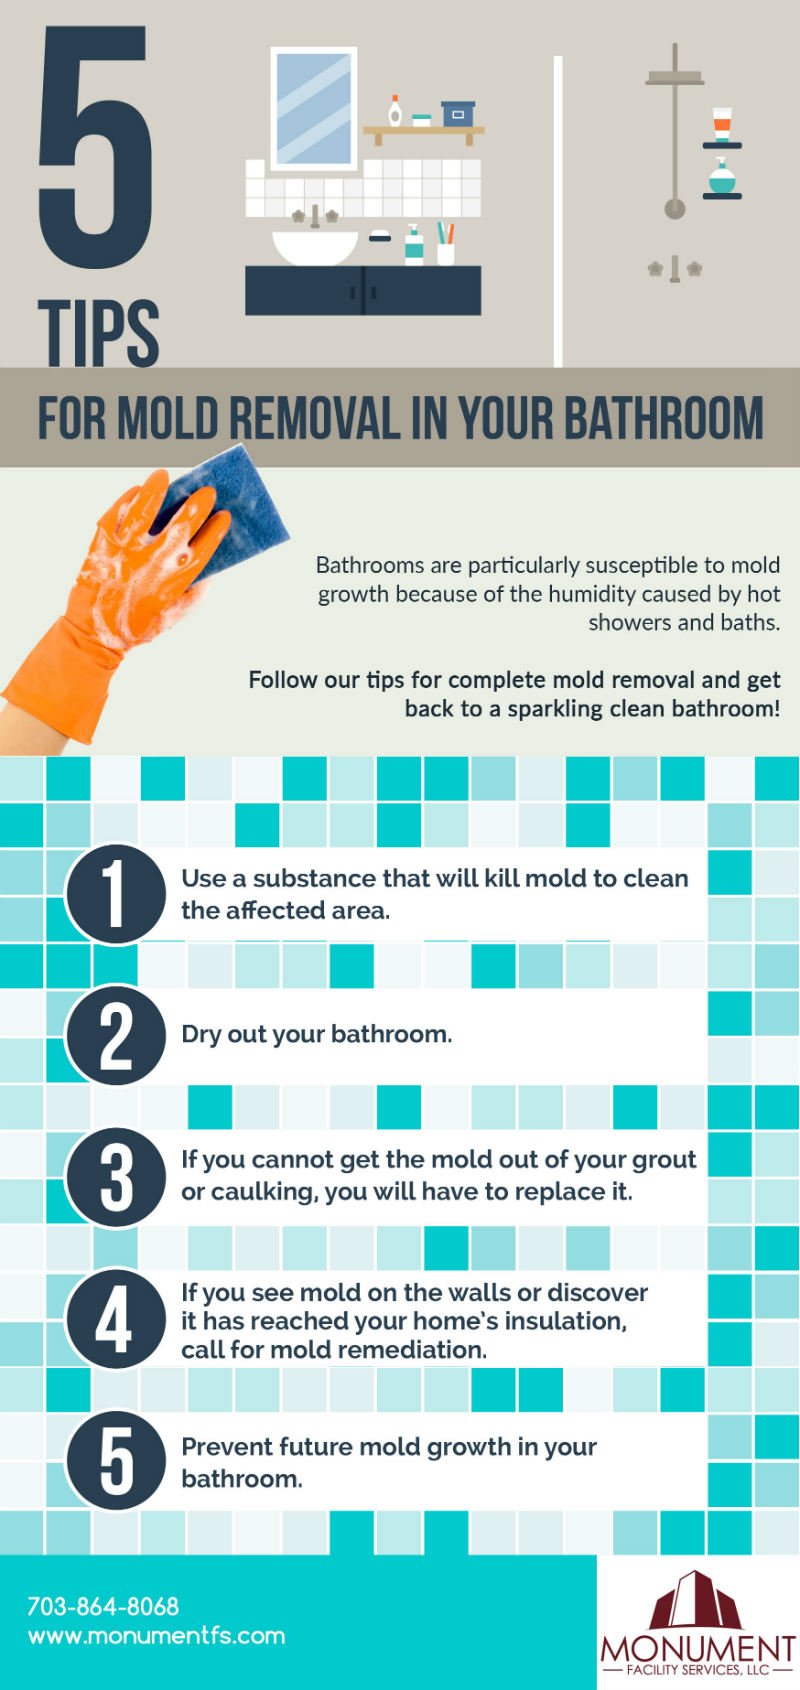 5 tips for mold removal